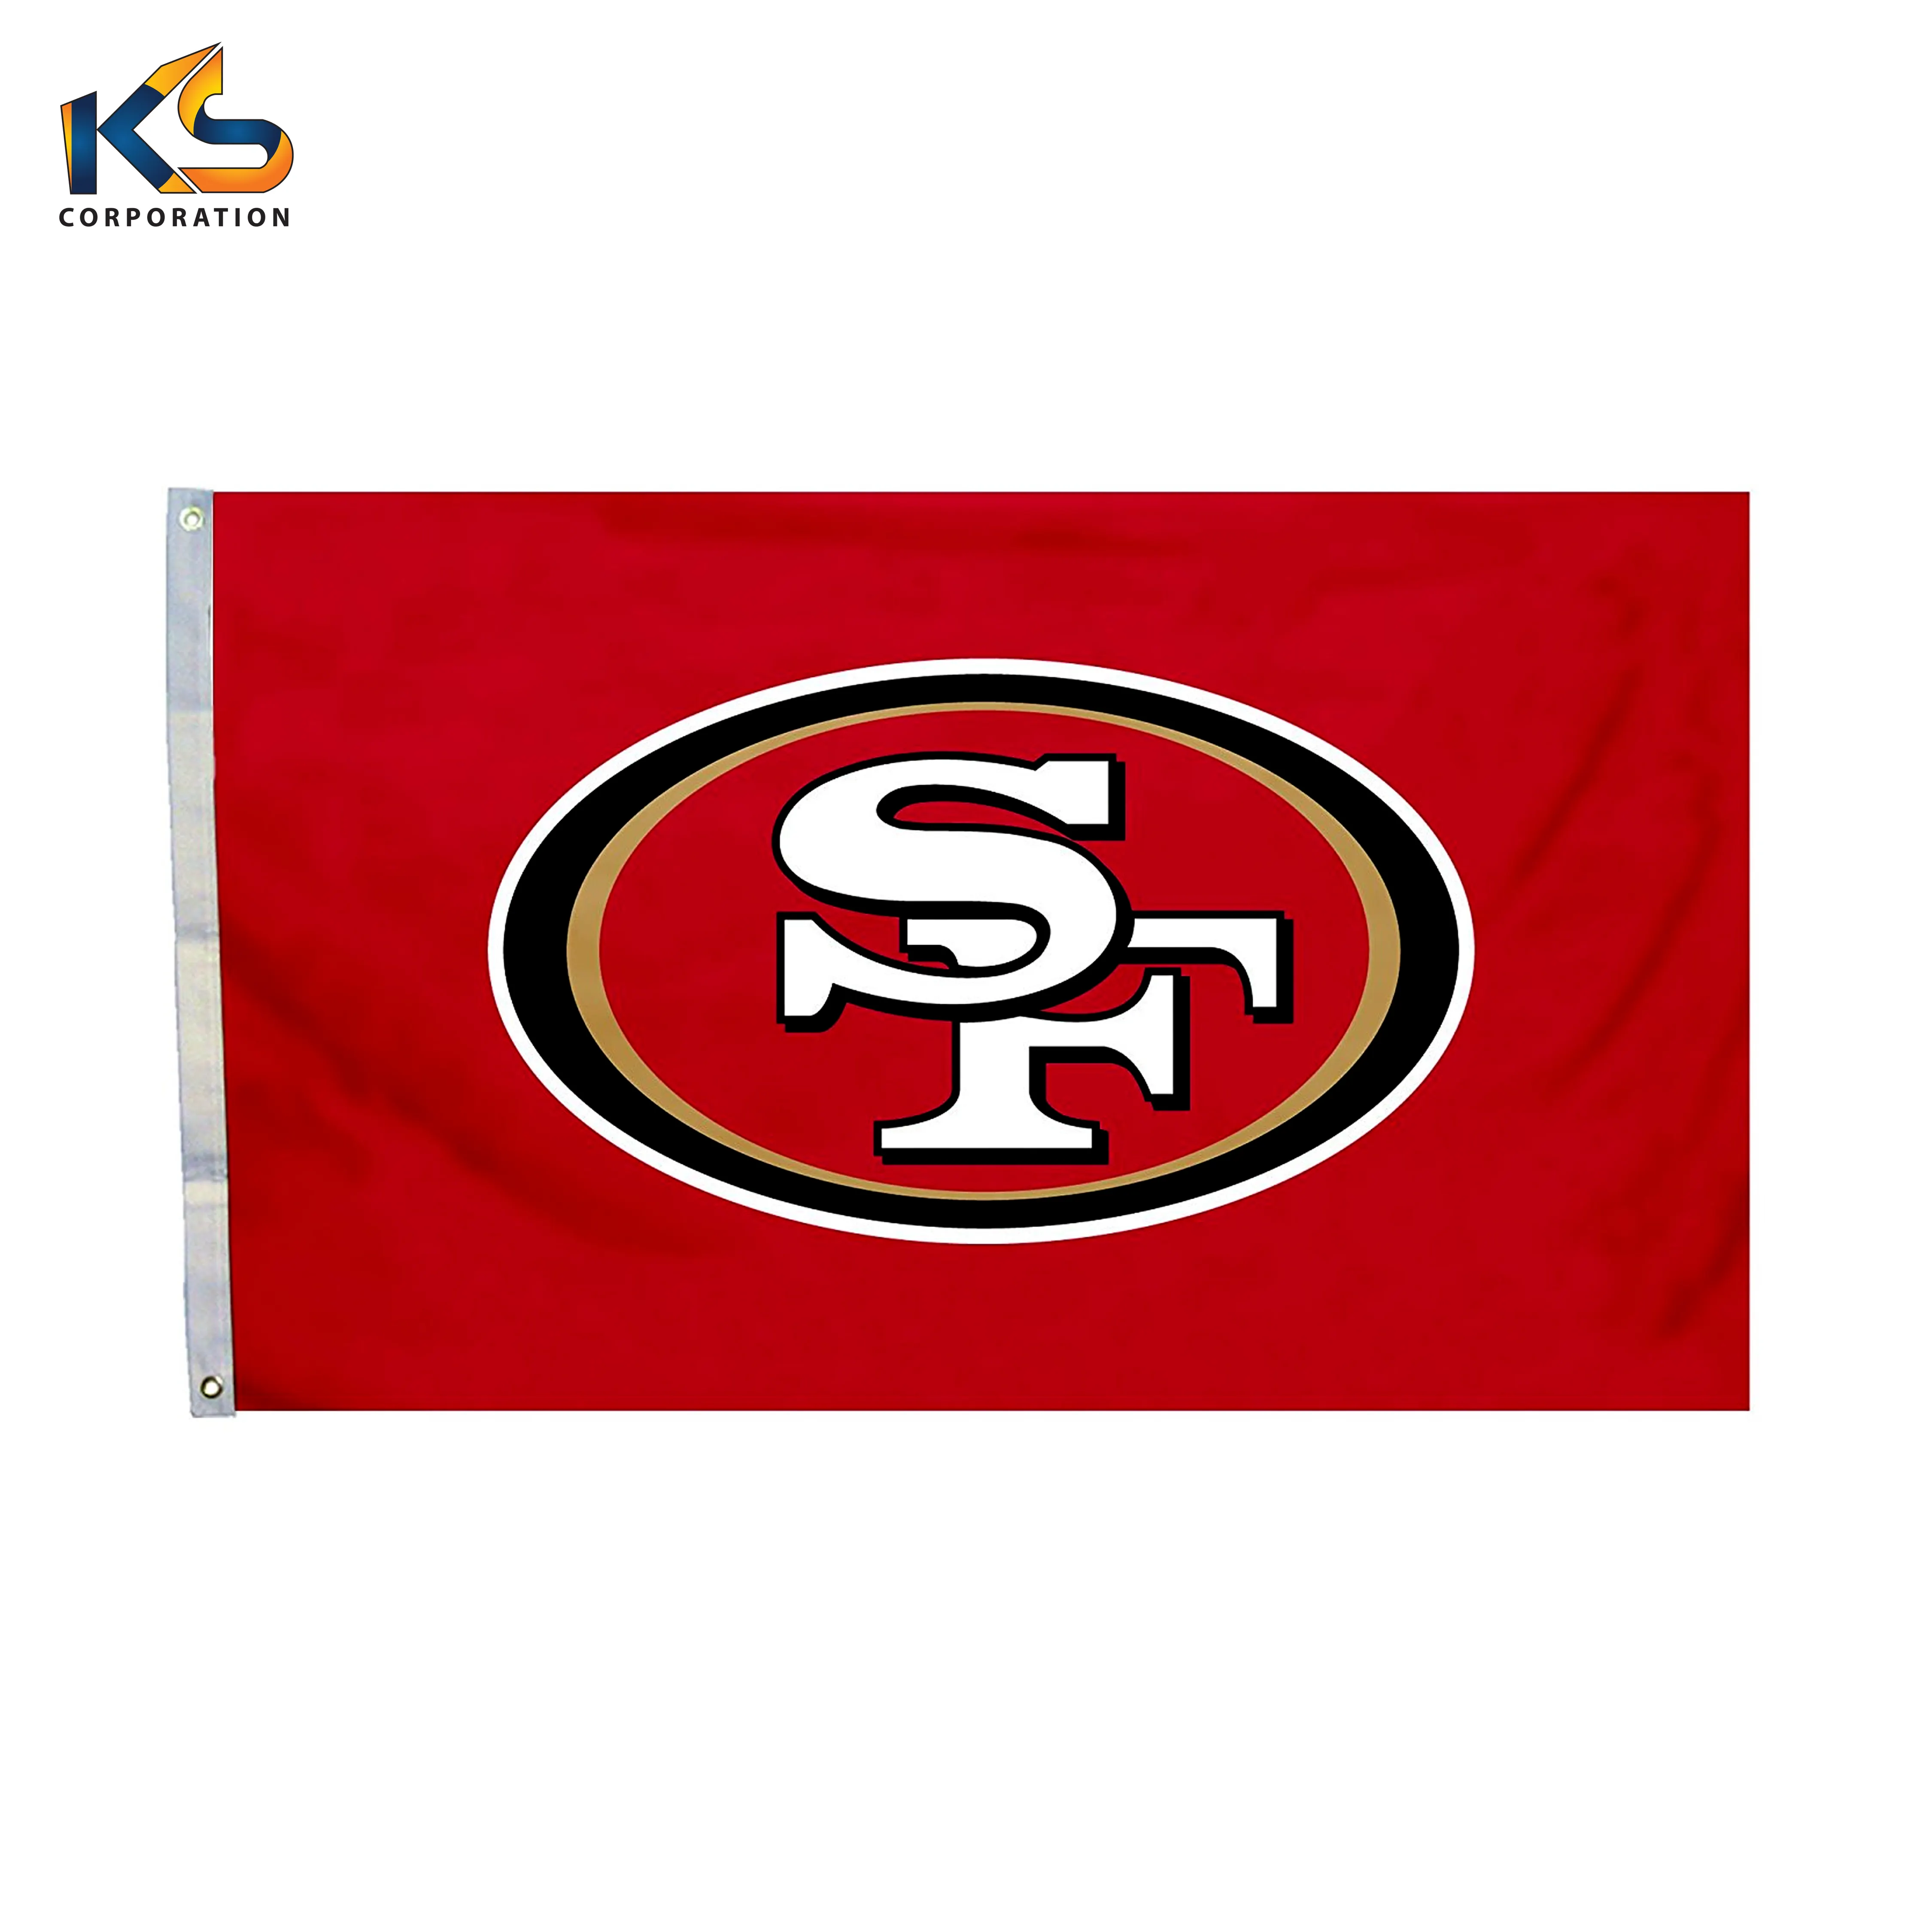 100% Polyester screen printed Custom Flags